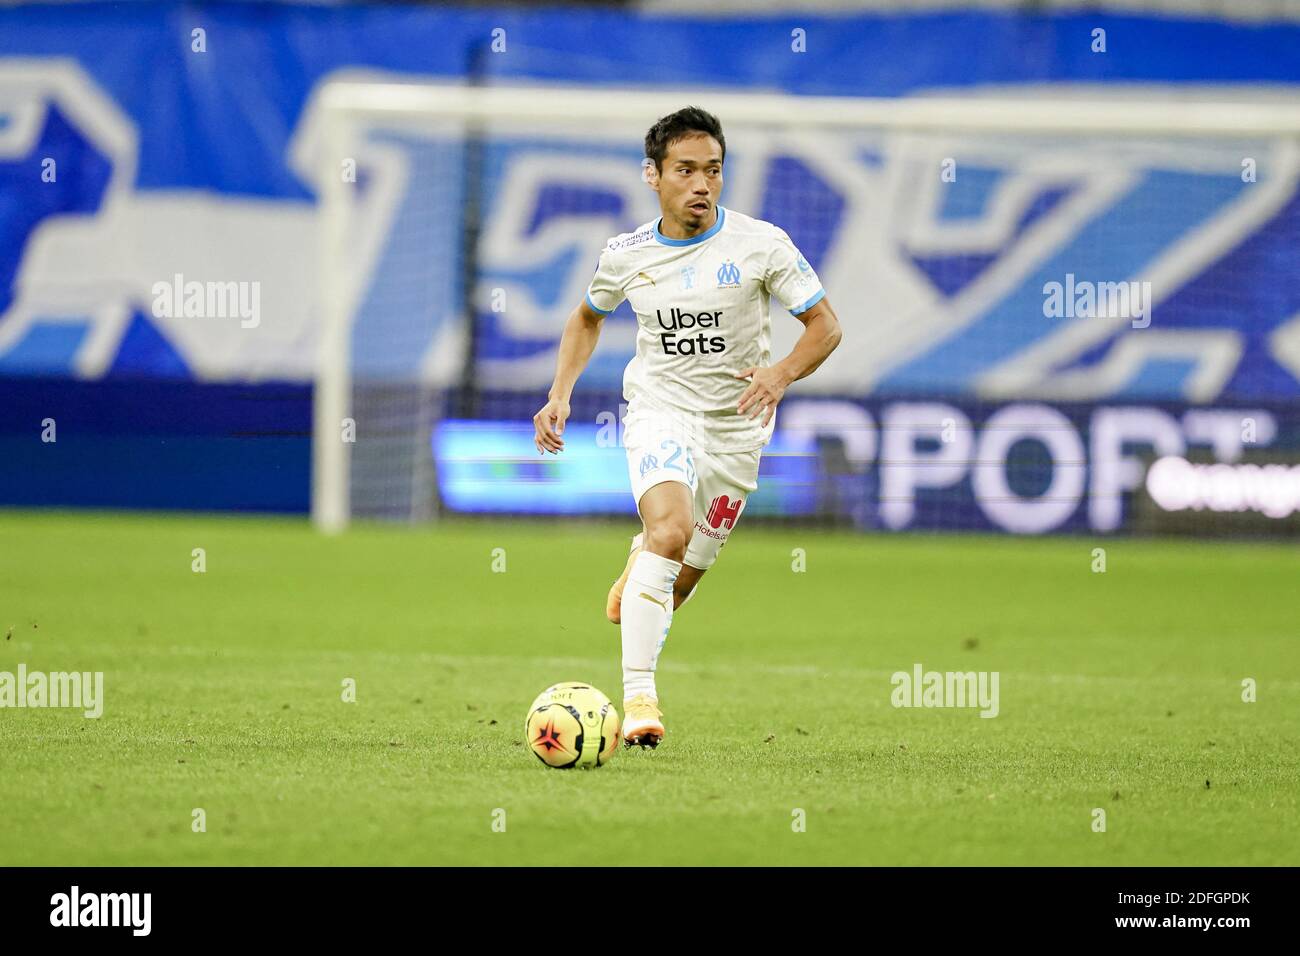 Yuto Nagatomo plays his first latch with OM during the Ligue 1 Olympique de  Marseille (OM) vs Lille (LOSC) at the Orange Velodrome, in Marseille,  France on September 20, 2020. Photo by